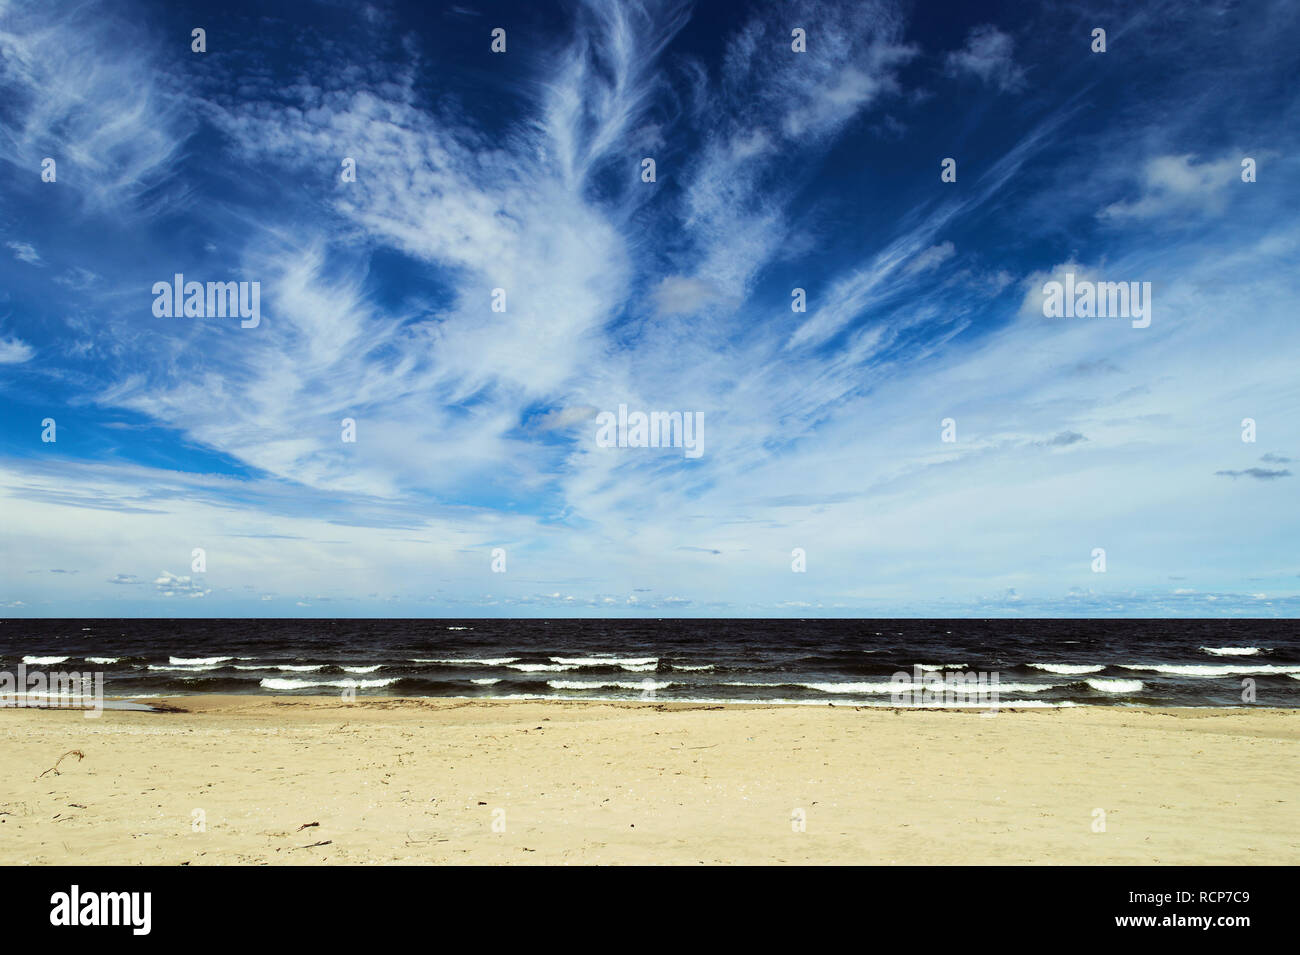 Landscape with stratocumulus clouds on the sky over the Baltic sea beach. Stegna, Pomerania, Poland. Stock Photo